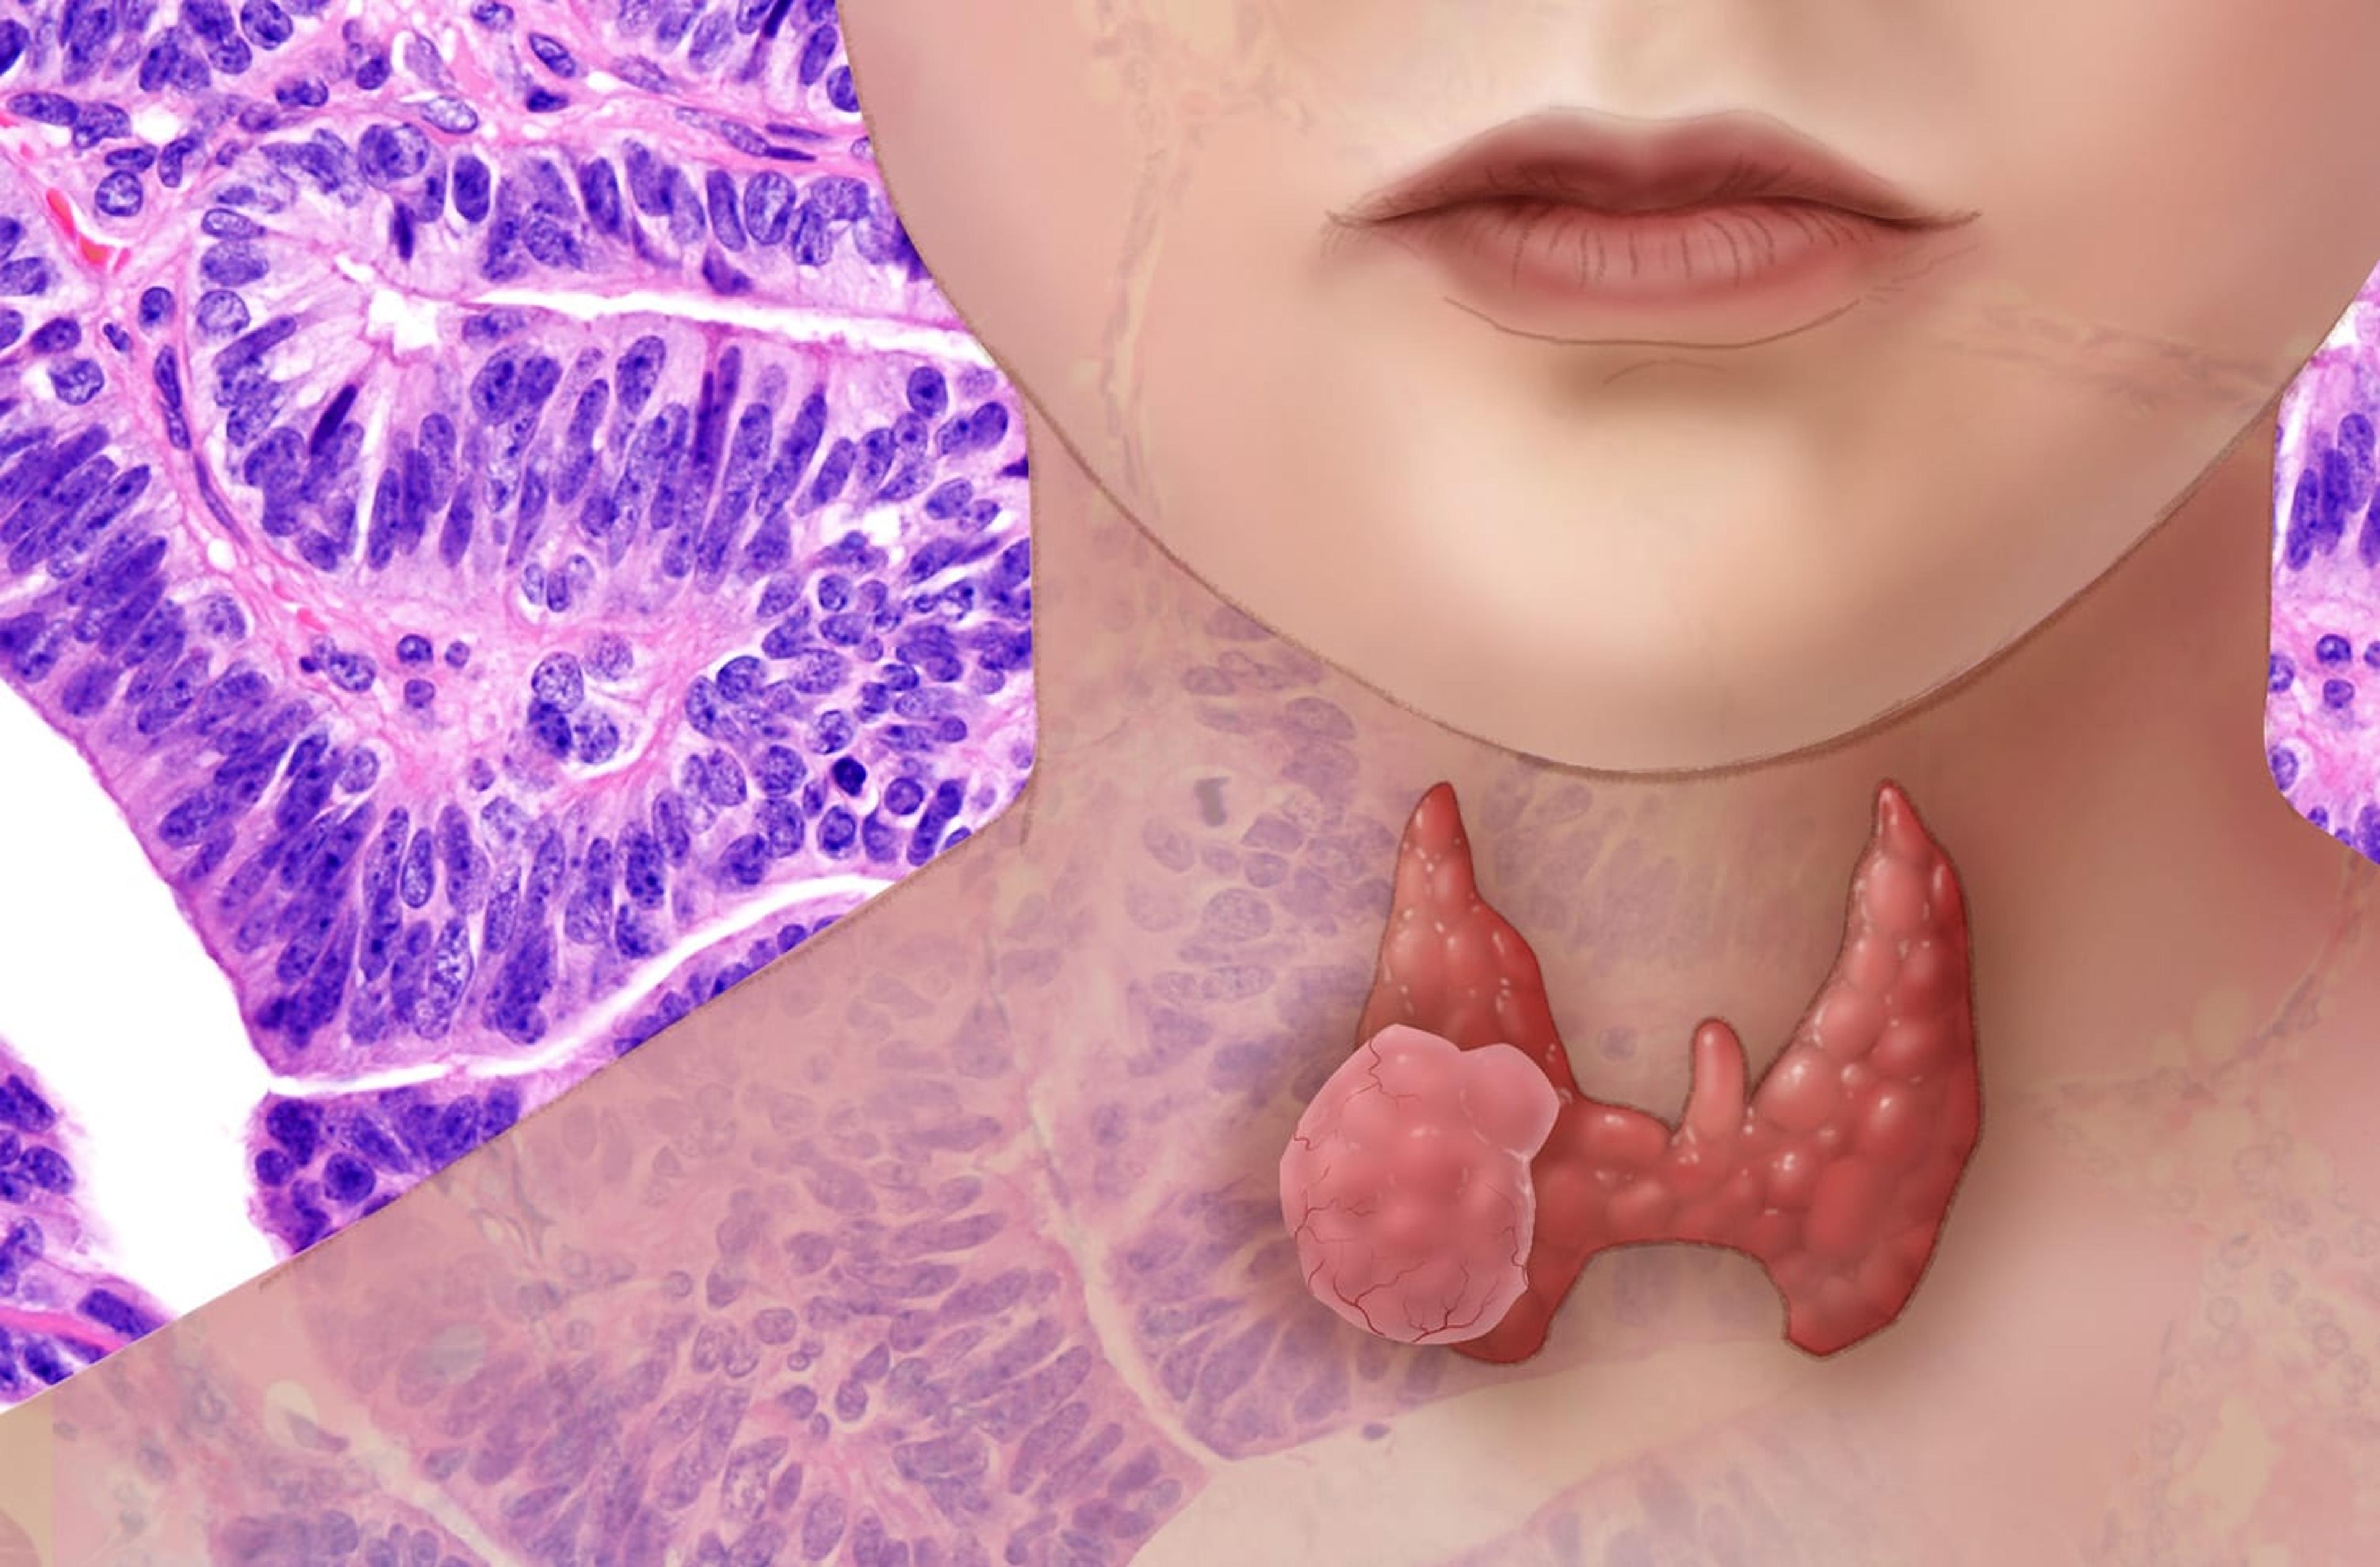 Illustration of thyroid cancer on a patient's neck